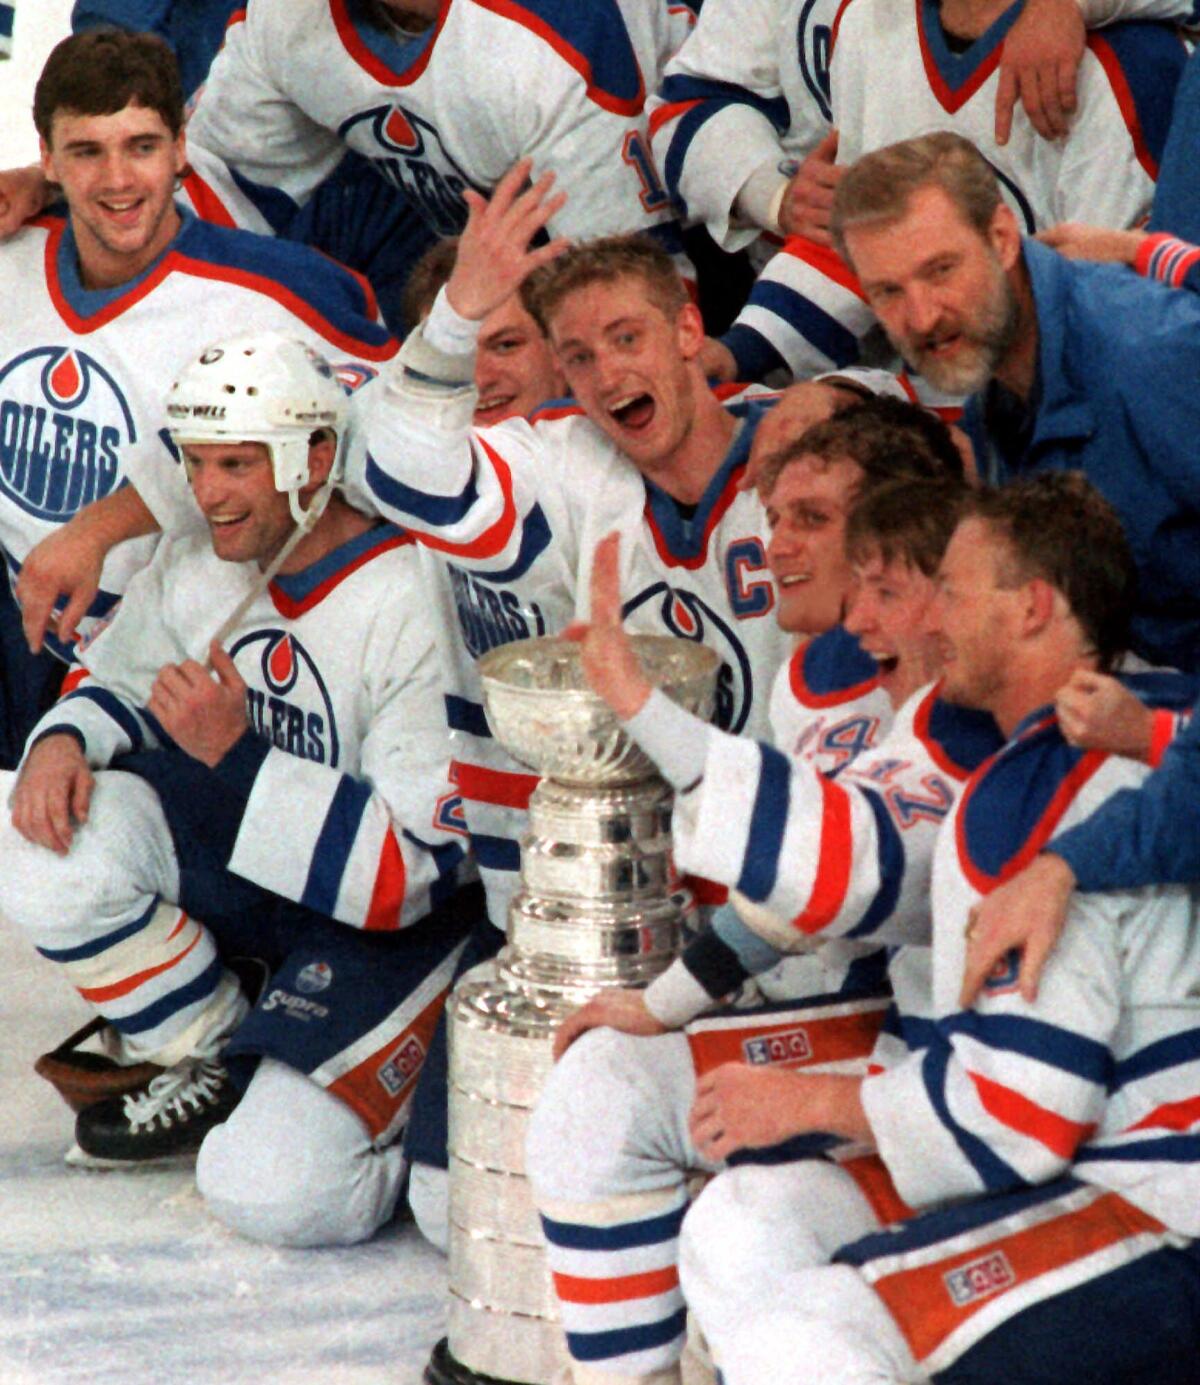 Wayne Gretzky, center, celebrates with his Edmonton Oilers teammates after defeating the Boston Bruins.